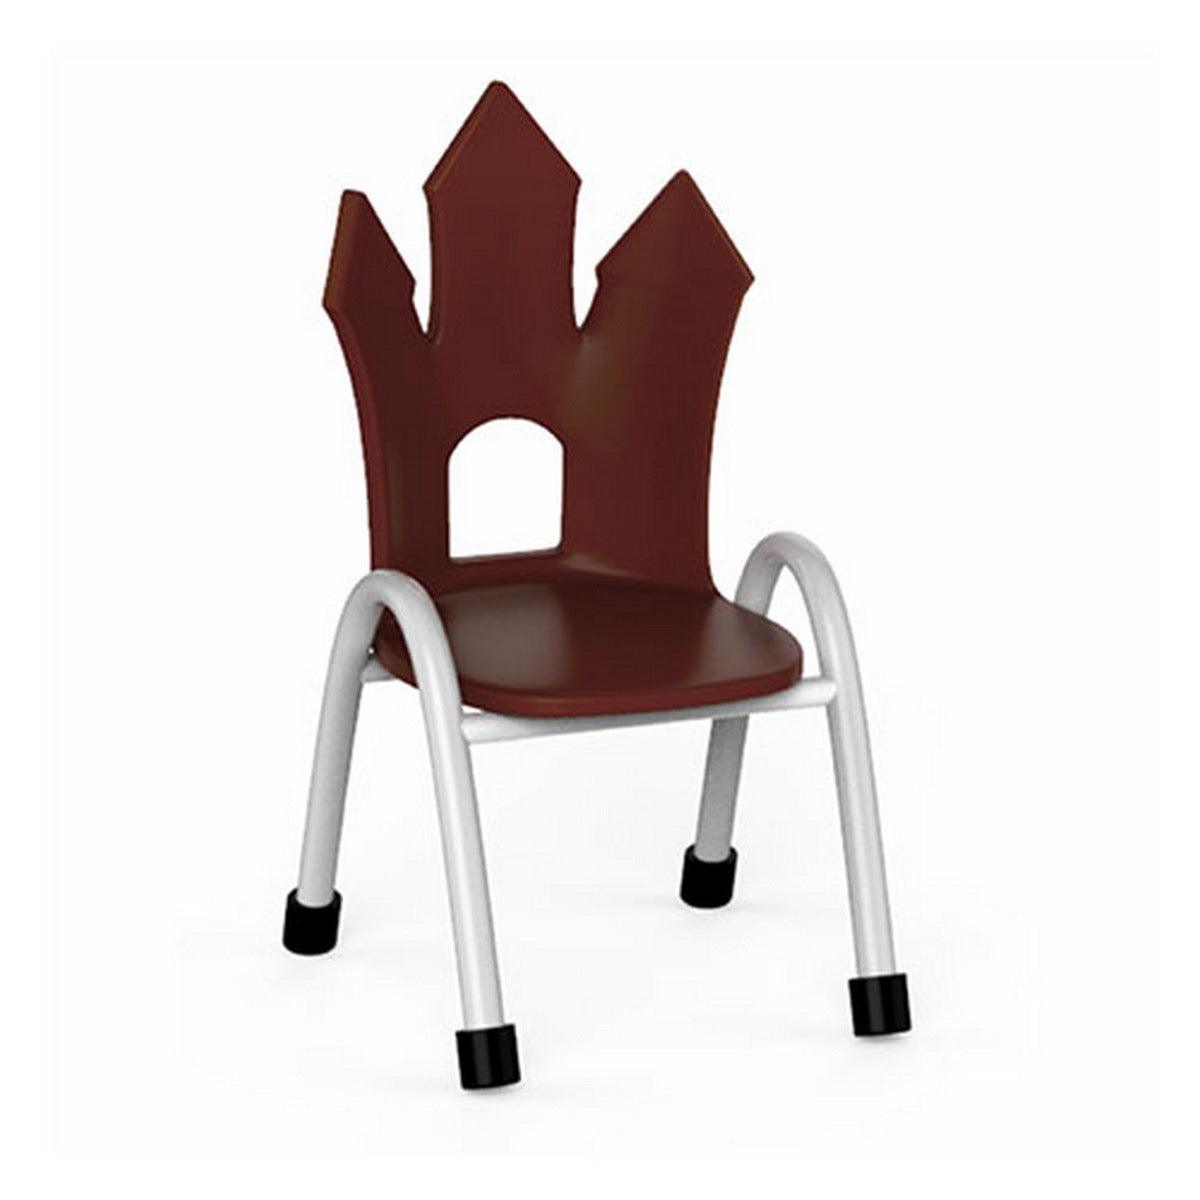 Ok Play Castle Chair, Study Chair, Sturdy And Durable Chair, Plastic Chair, Perfect For Home, Creches And School, Brown, 5 to 10 Years, Height 12 Inches